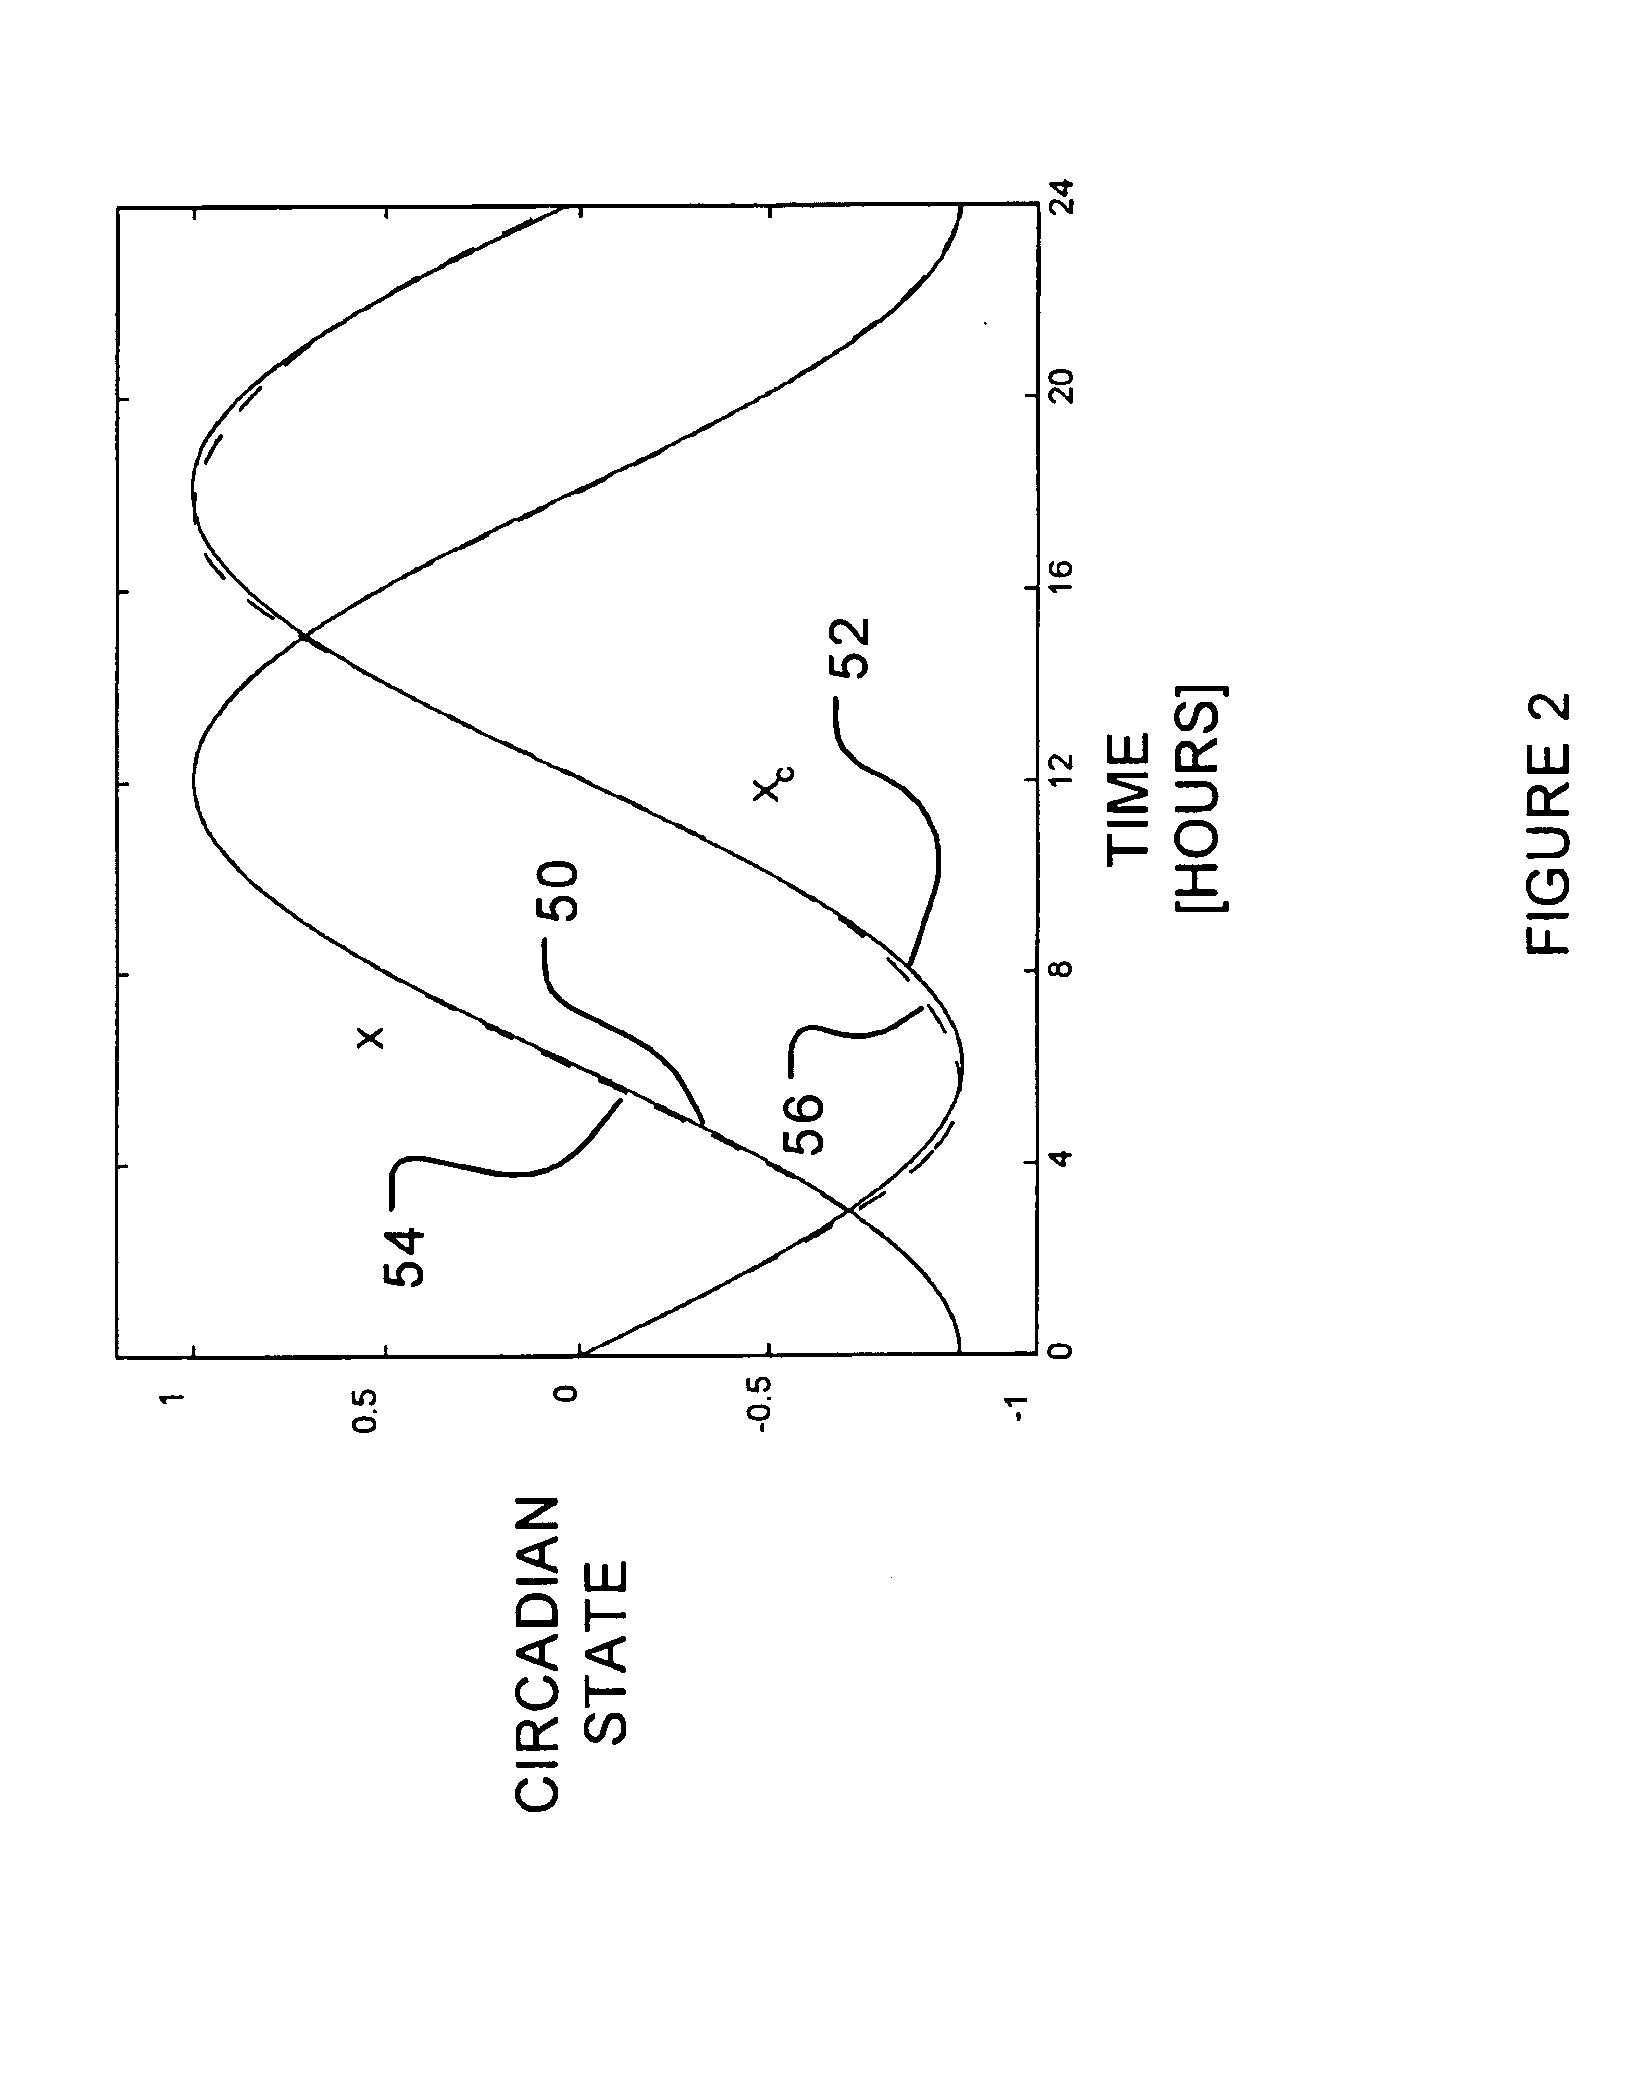 System and method for control of a subject's circadian cycle